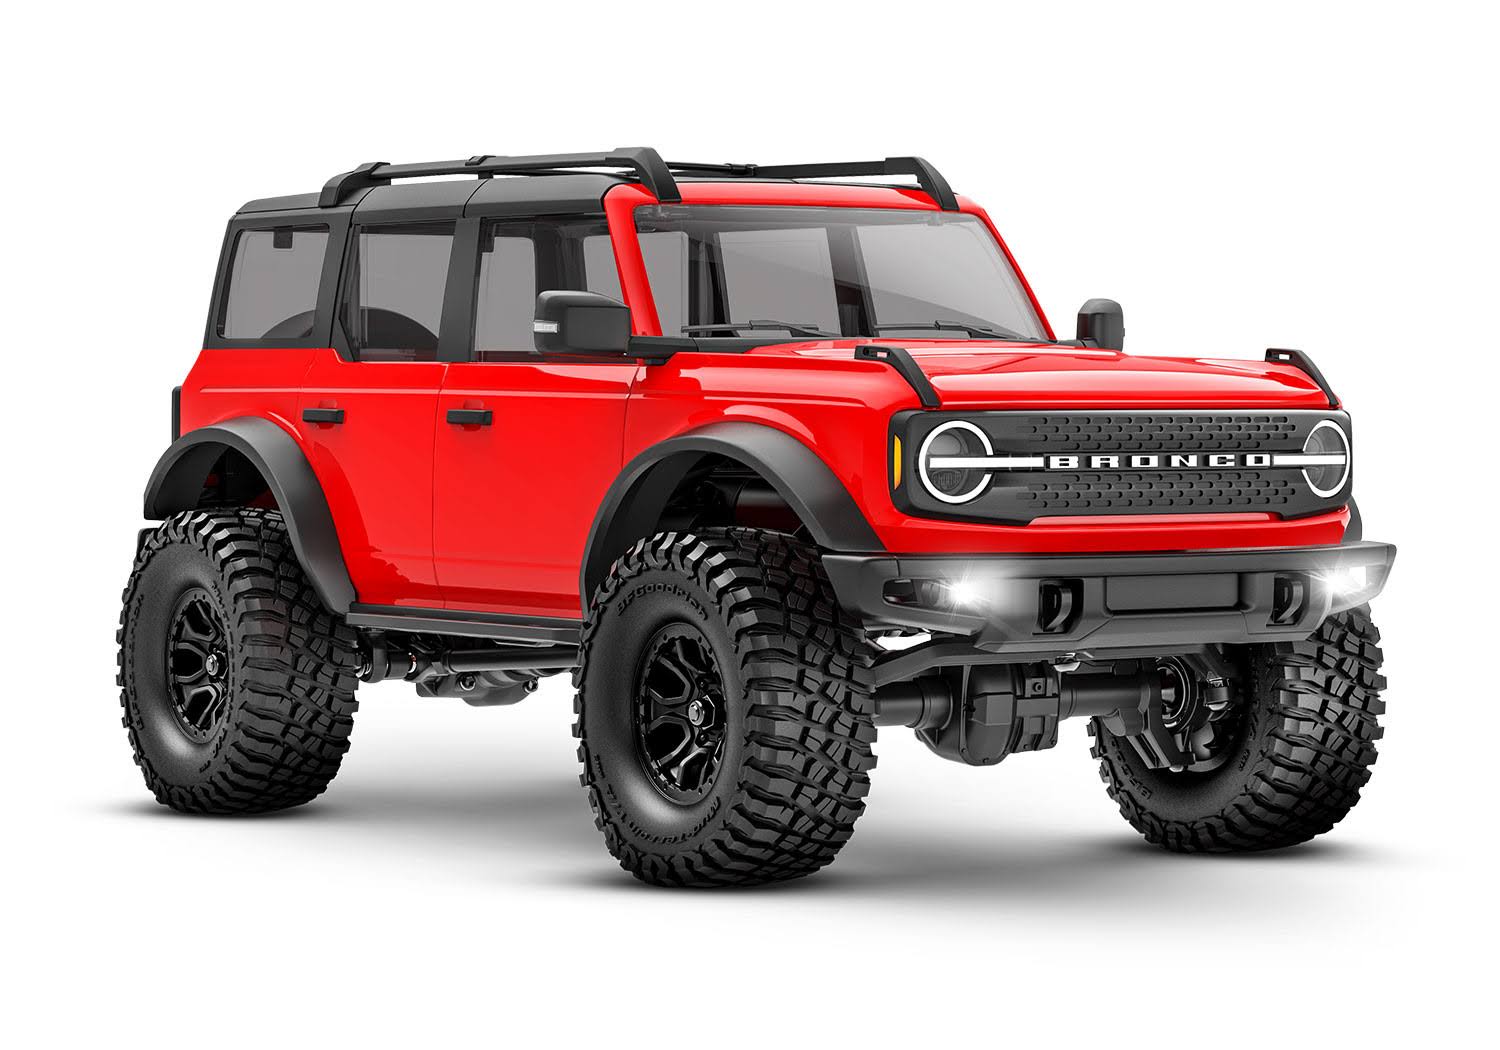 Traxxas TRX-4M Ford Bronco 4x4 red RTR battery/charger included 97074-1RED